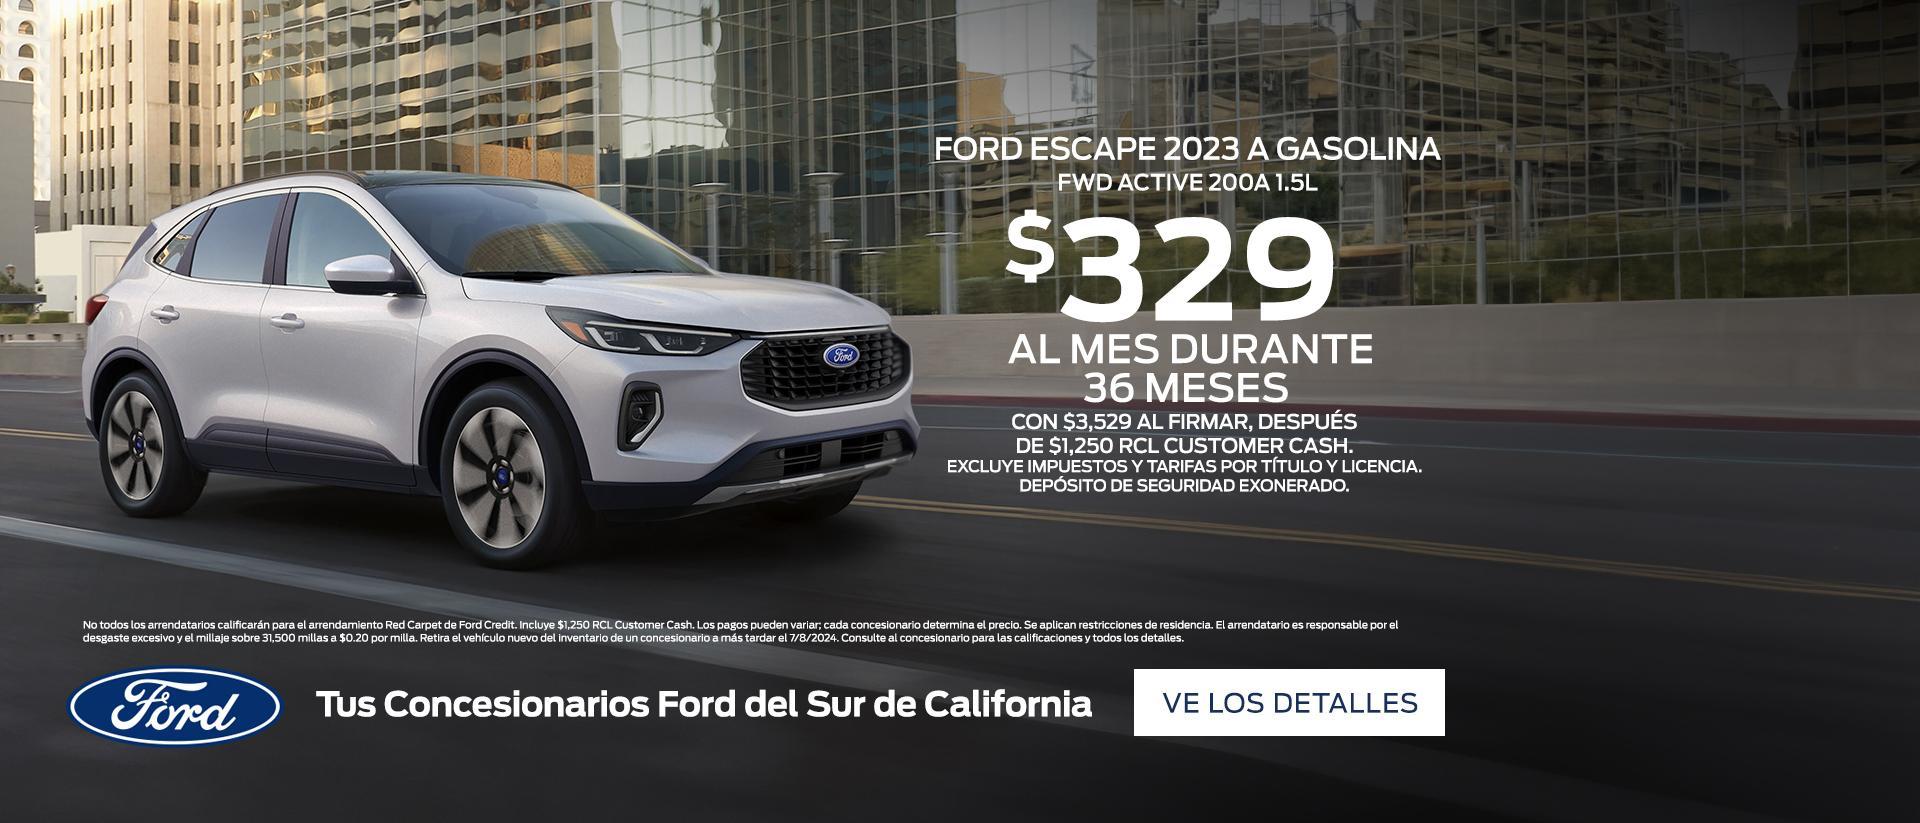 2023 Ford Escape Offer | Southern California Ford Dealers